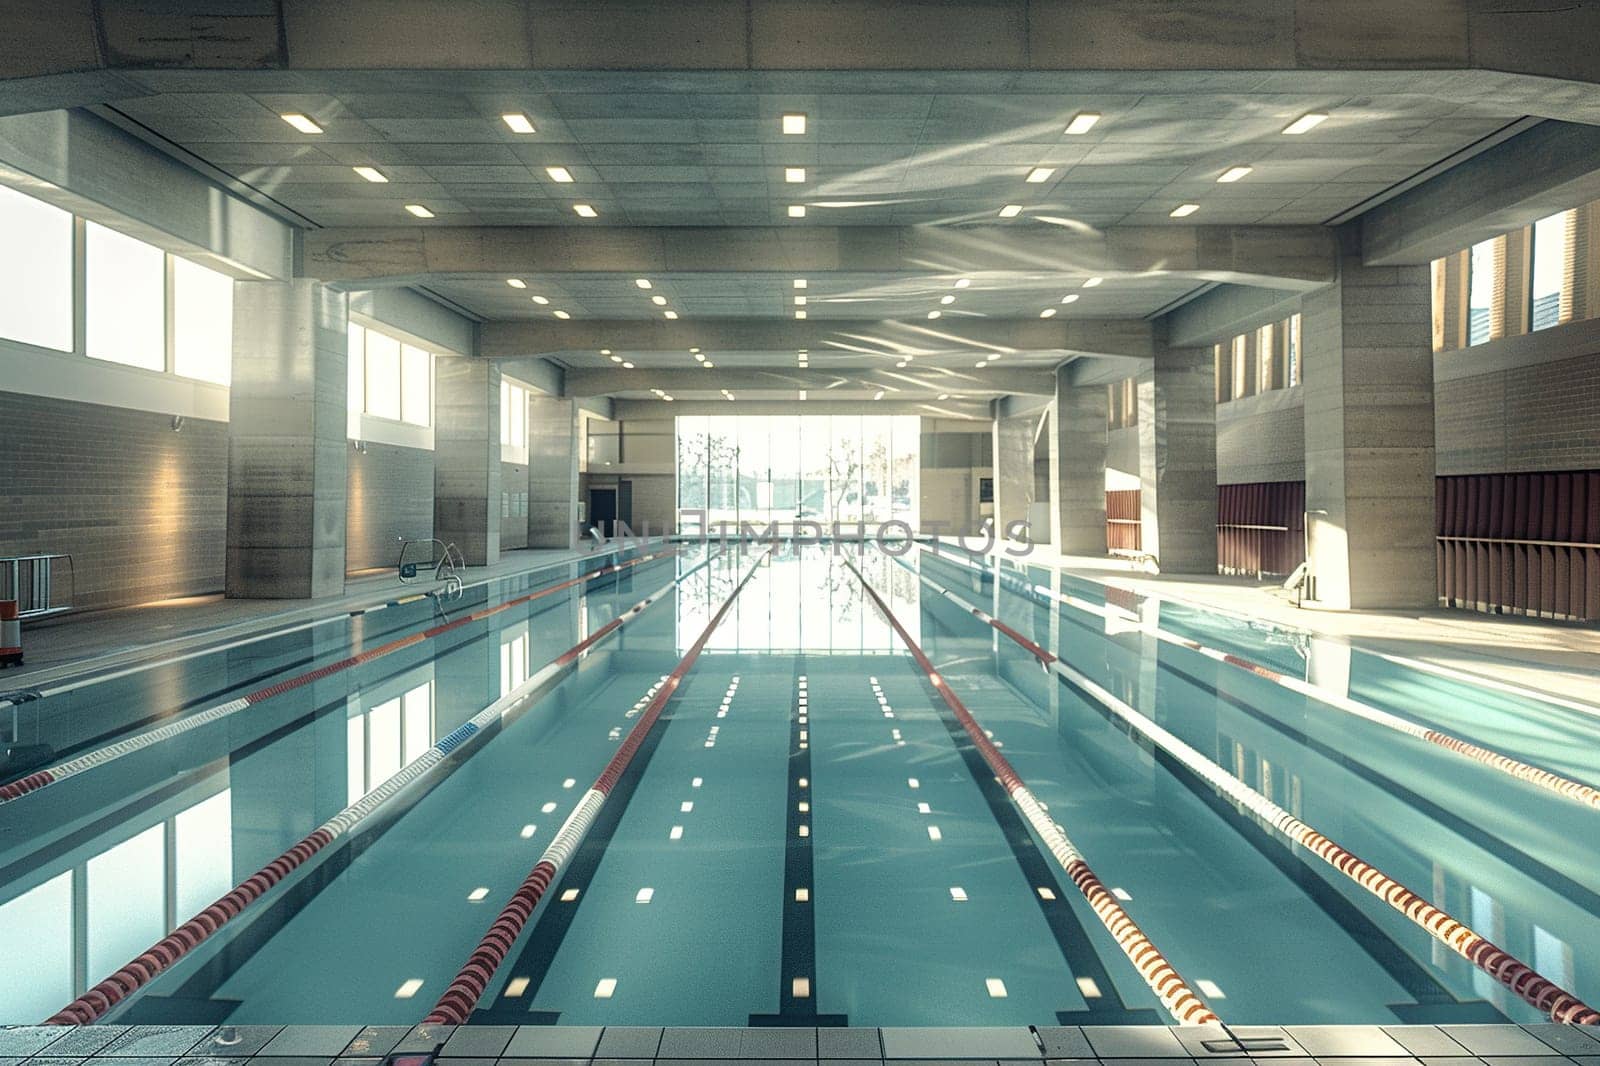 Modern sports pool without people.